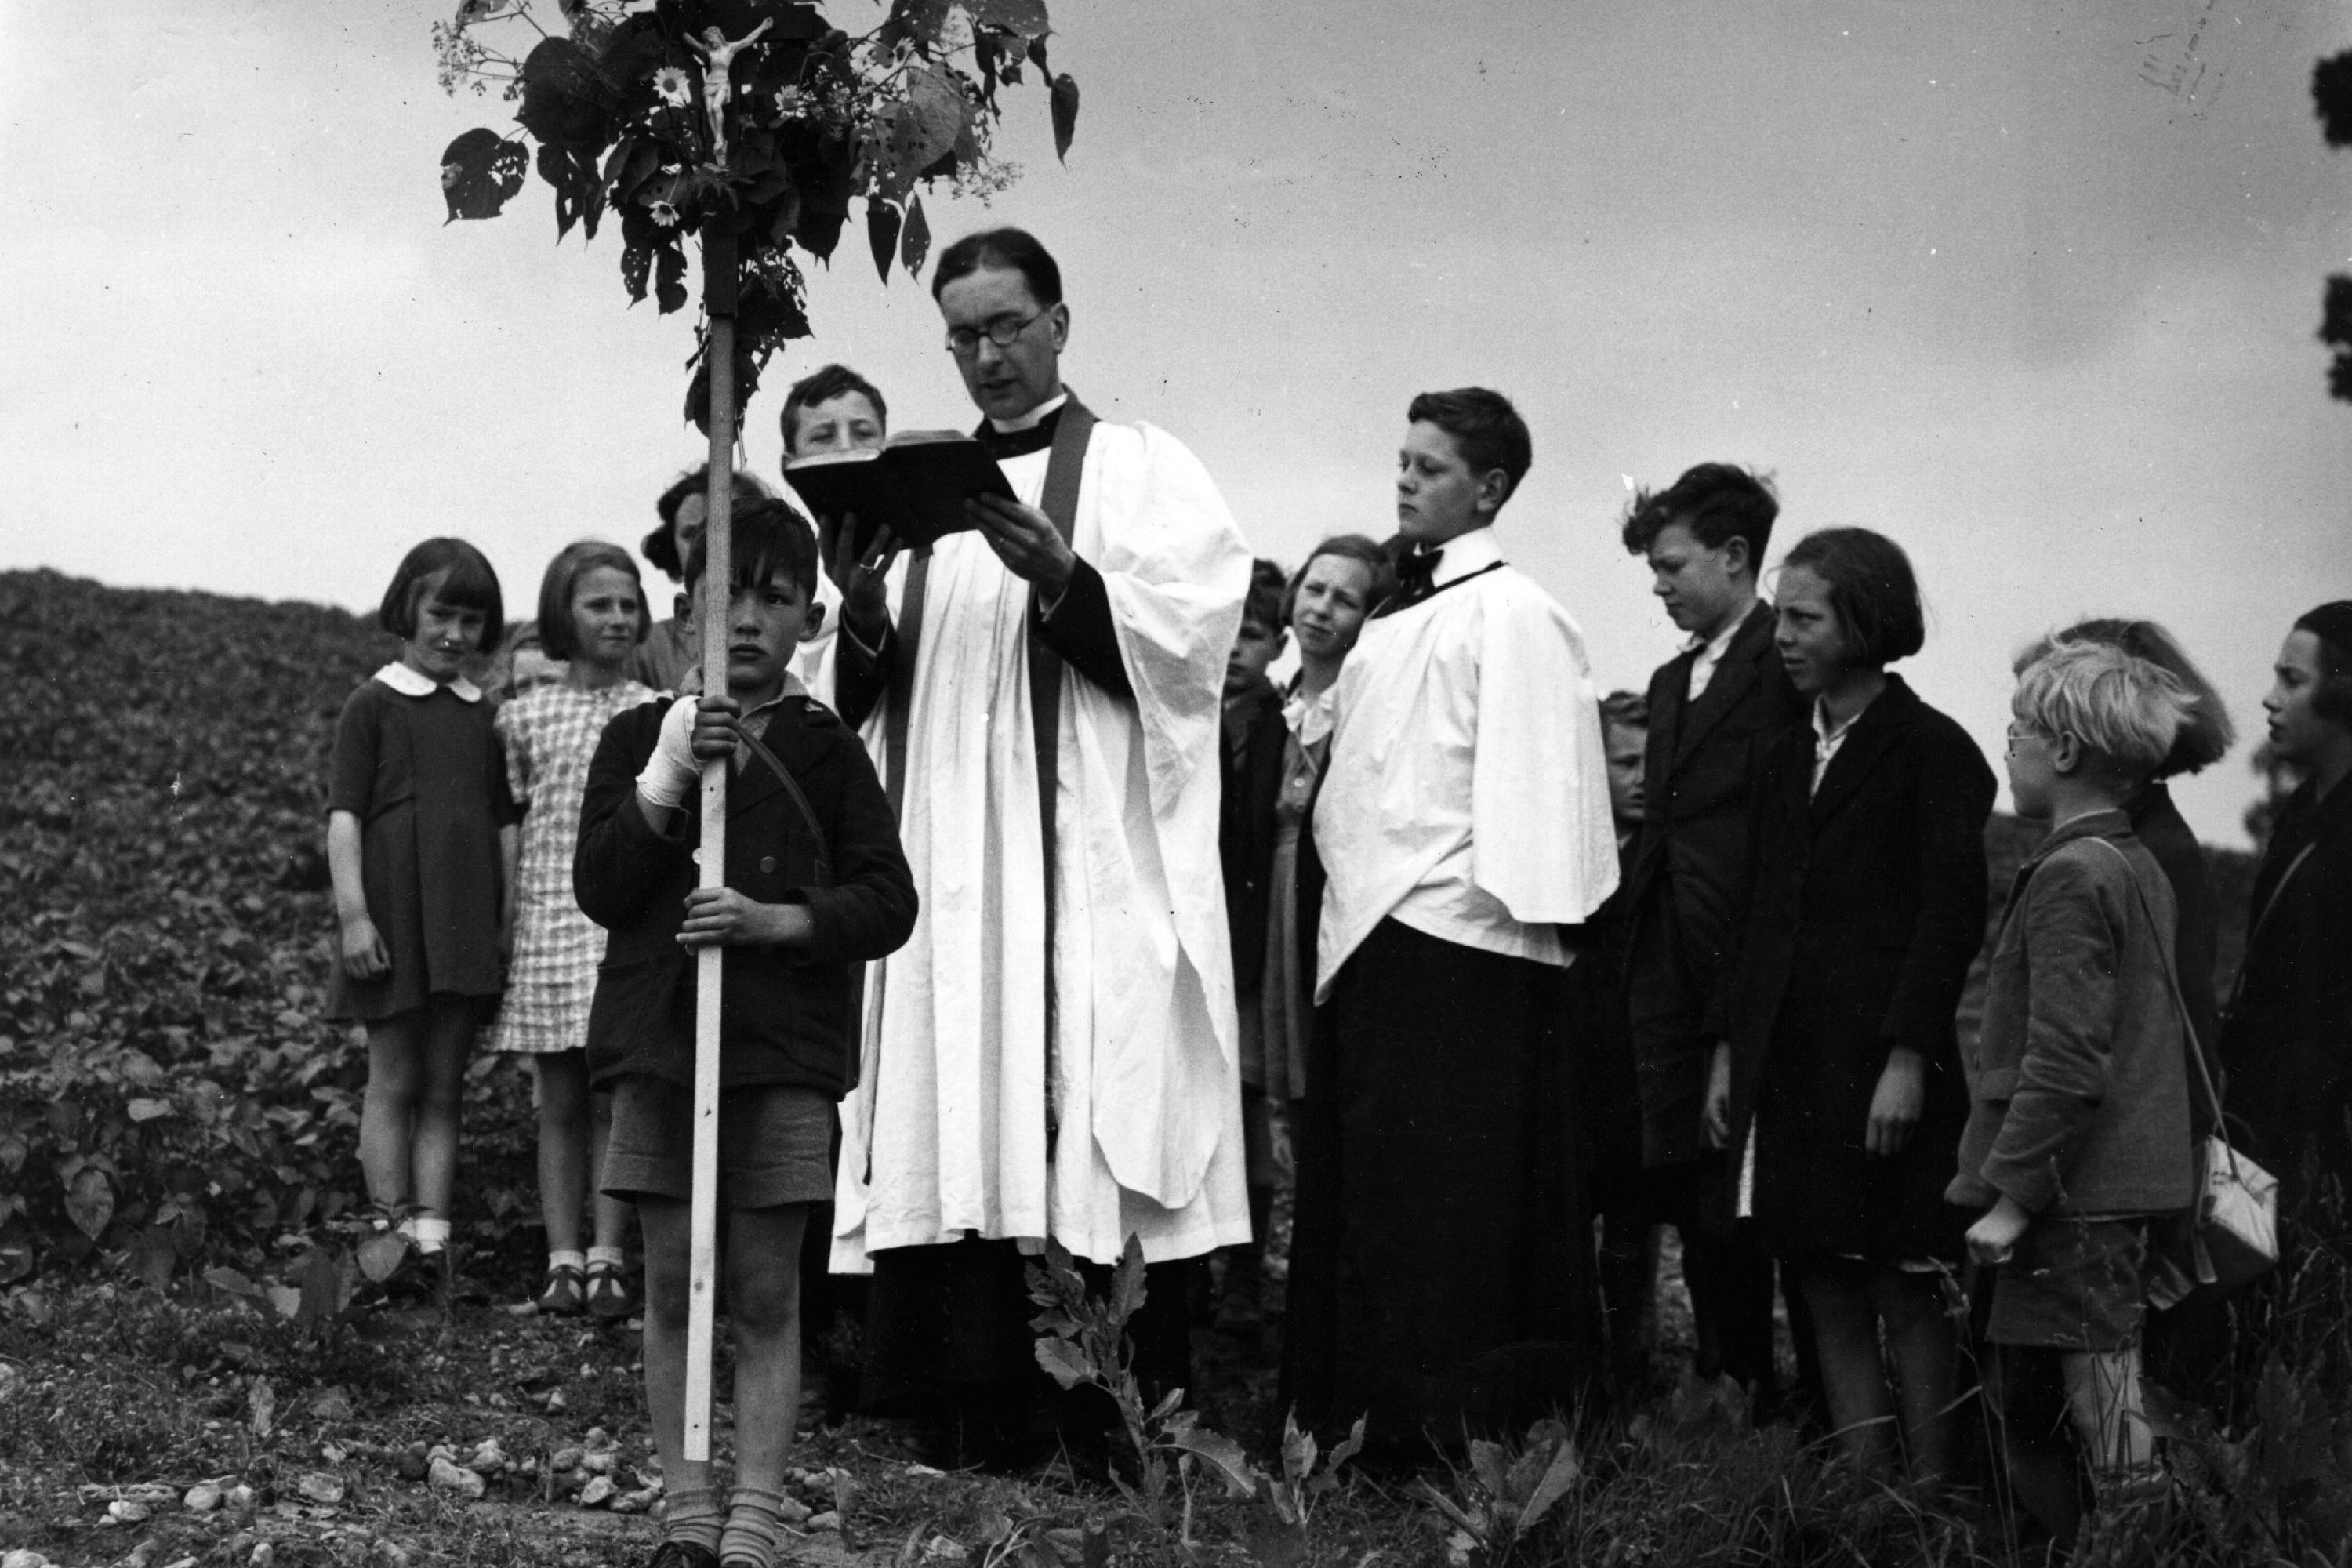 A homily for Rogation Monday